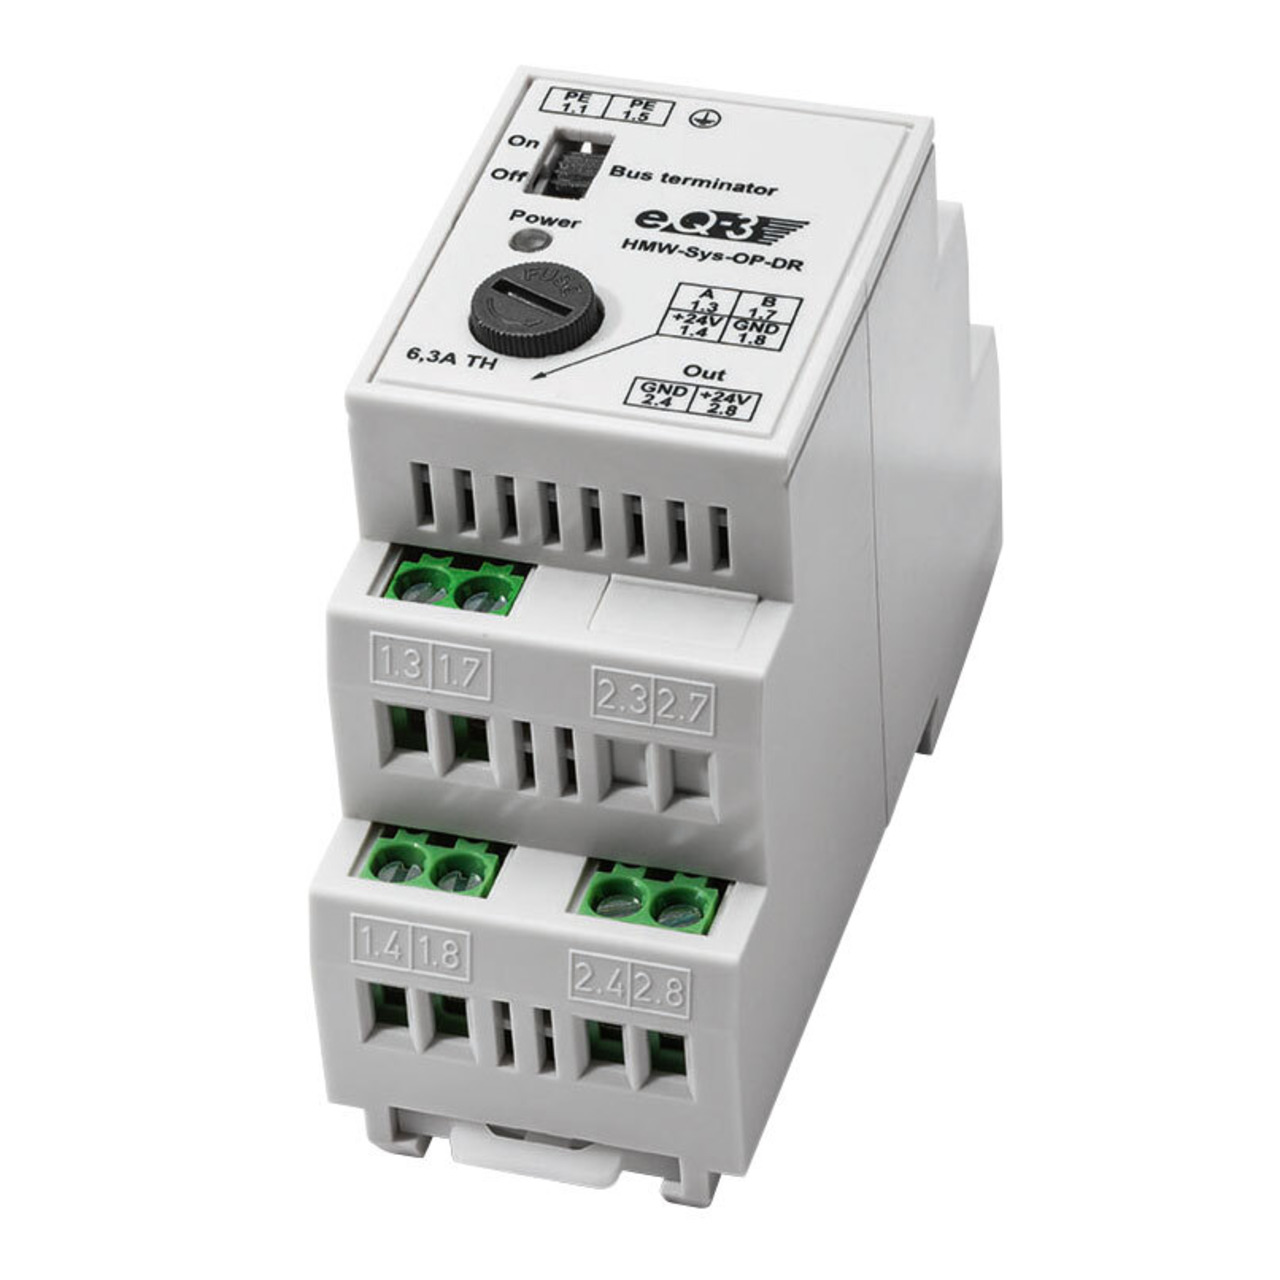 Homematic Wired RS485 berspannungsschutz HMW-Sys-OP-DR fr Smart Home - Hausautomation